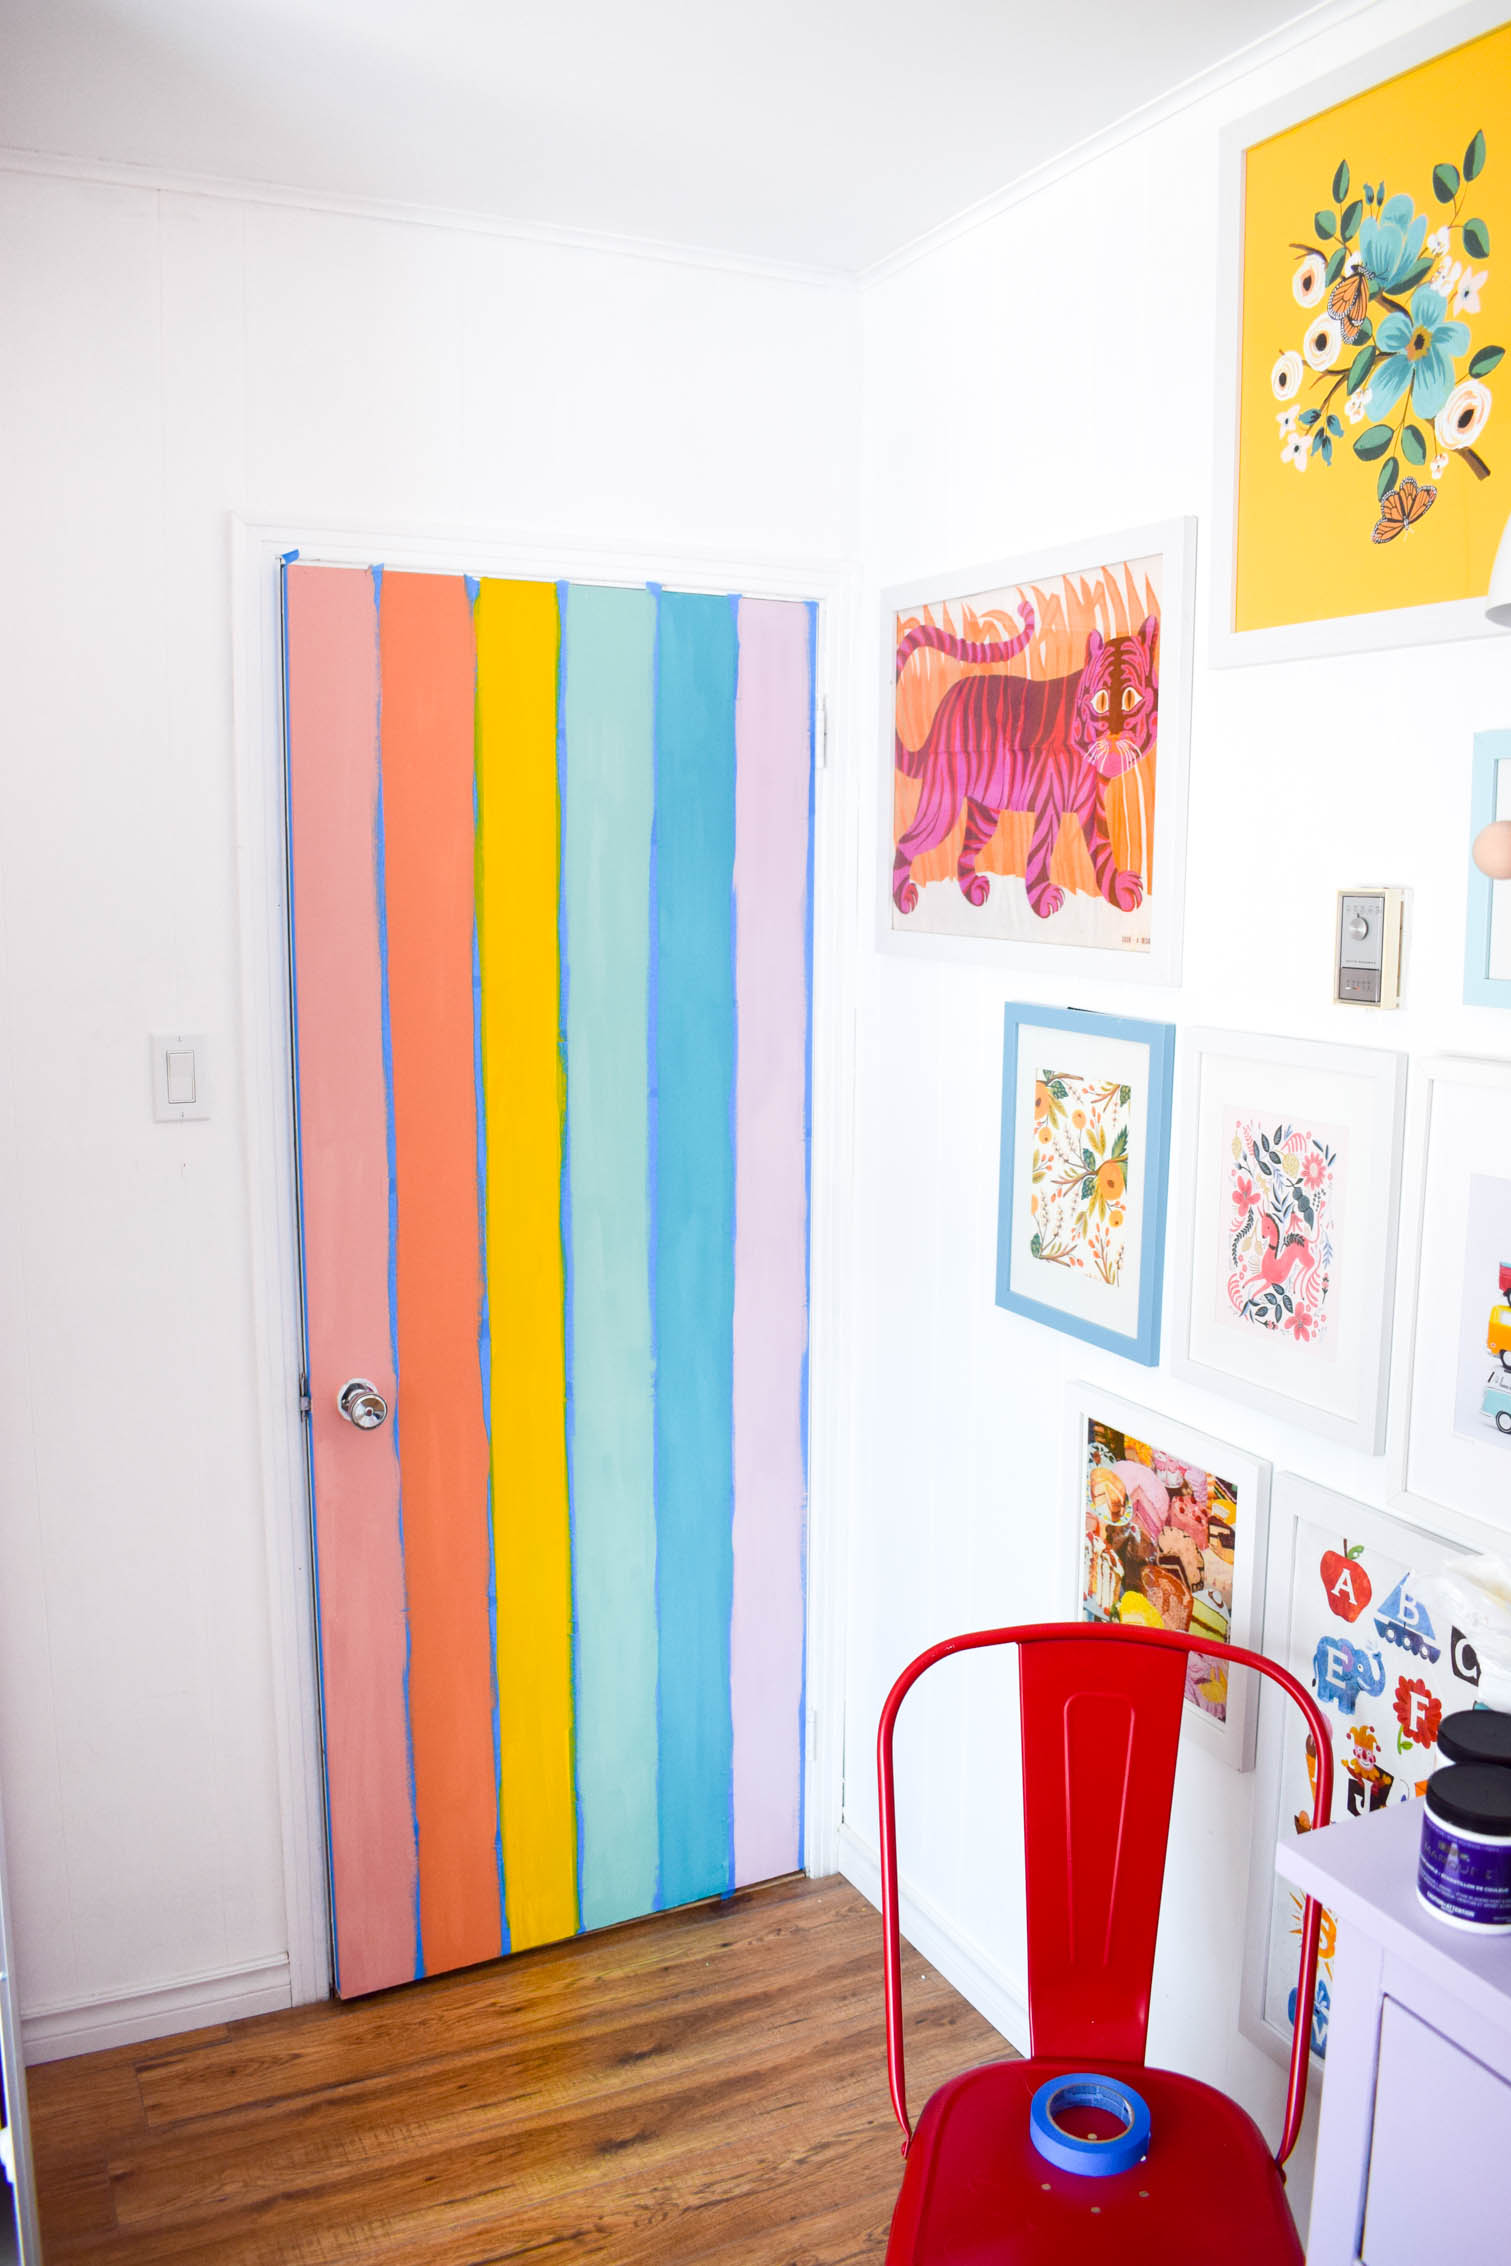 A DIY rainbow nursery door is how you nail two trends in one project! Get rainbows and murals all in one, and add a major pop of color to any space.